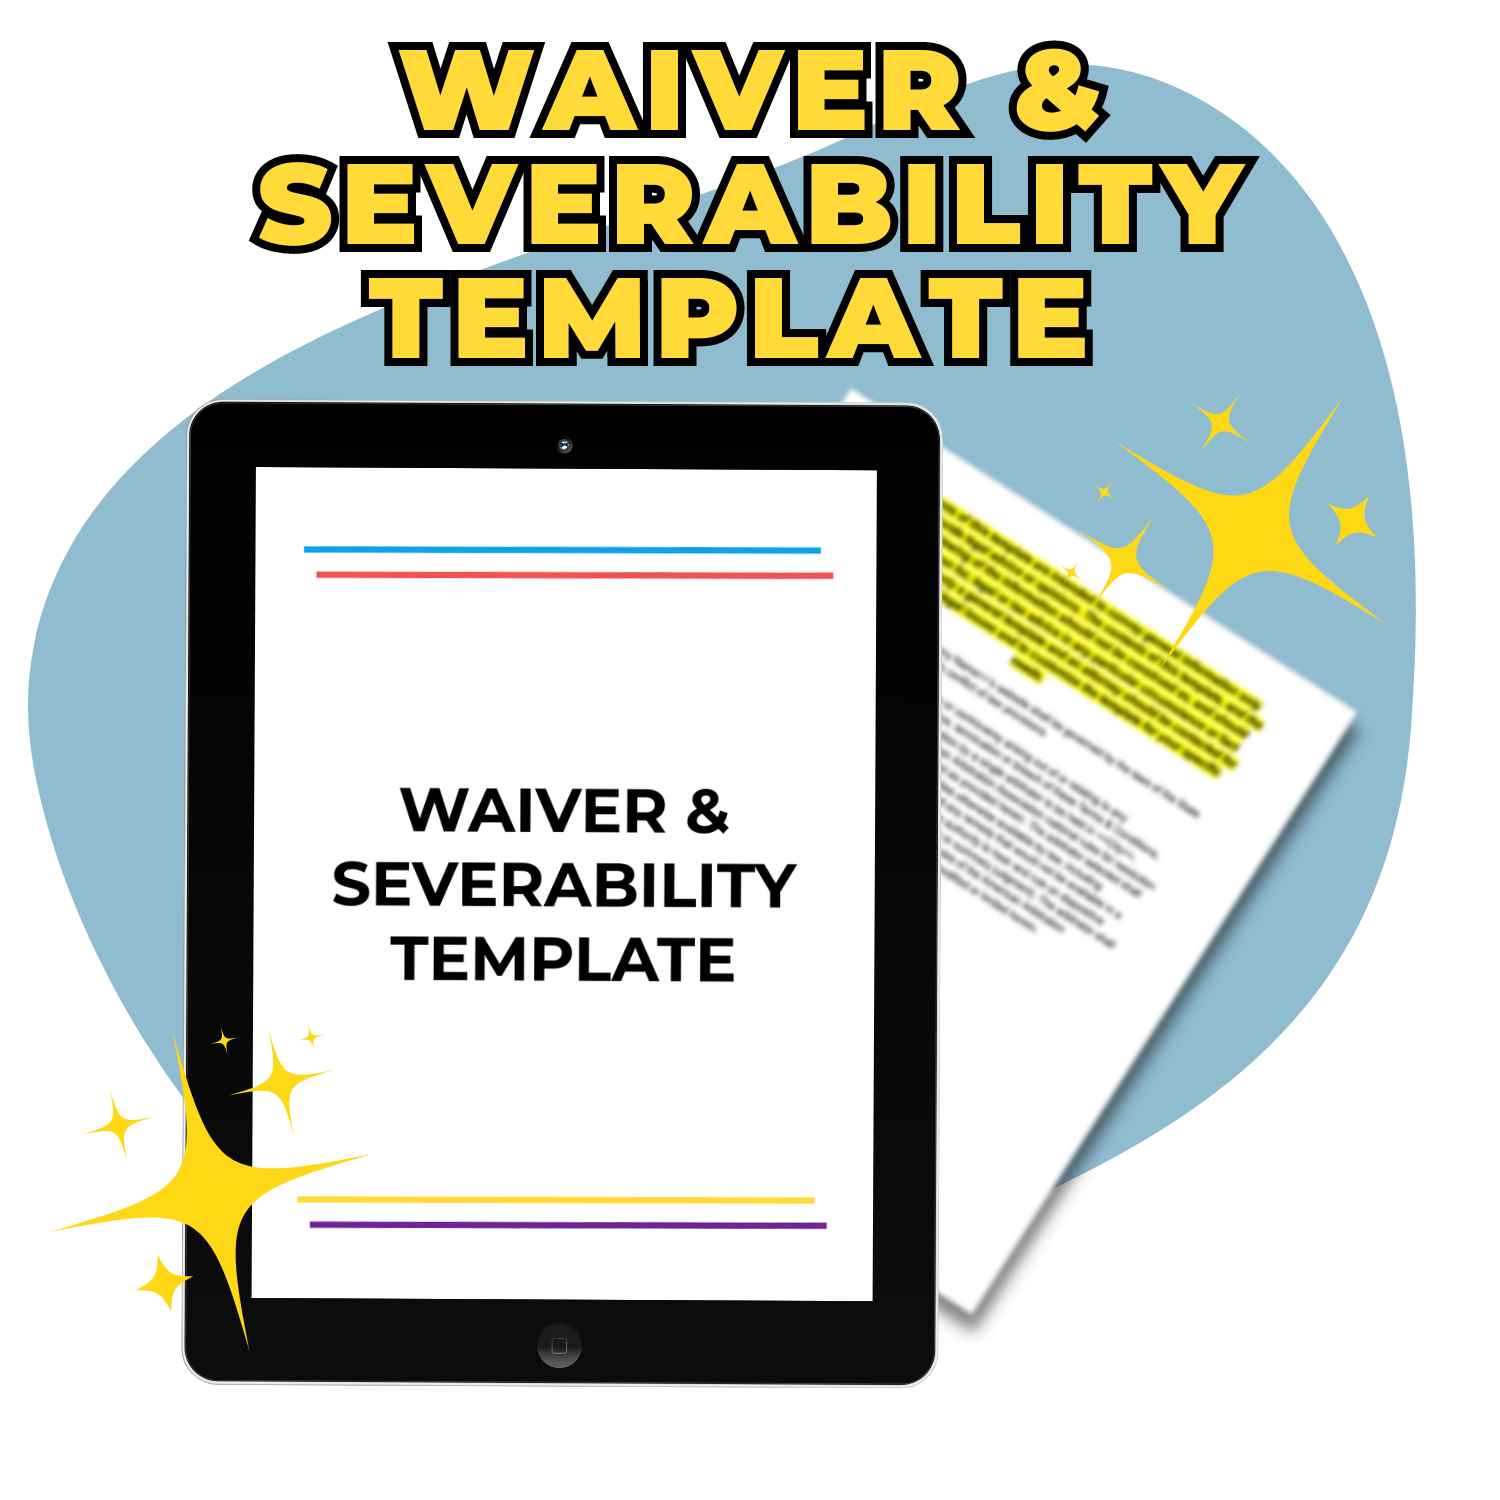 Graphic of a Waiver &amp; Severability Clause Template from ElizabethStapleton.com displaying with a sparkle effect, overlaid on background circles with a document icon.